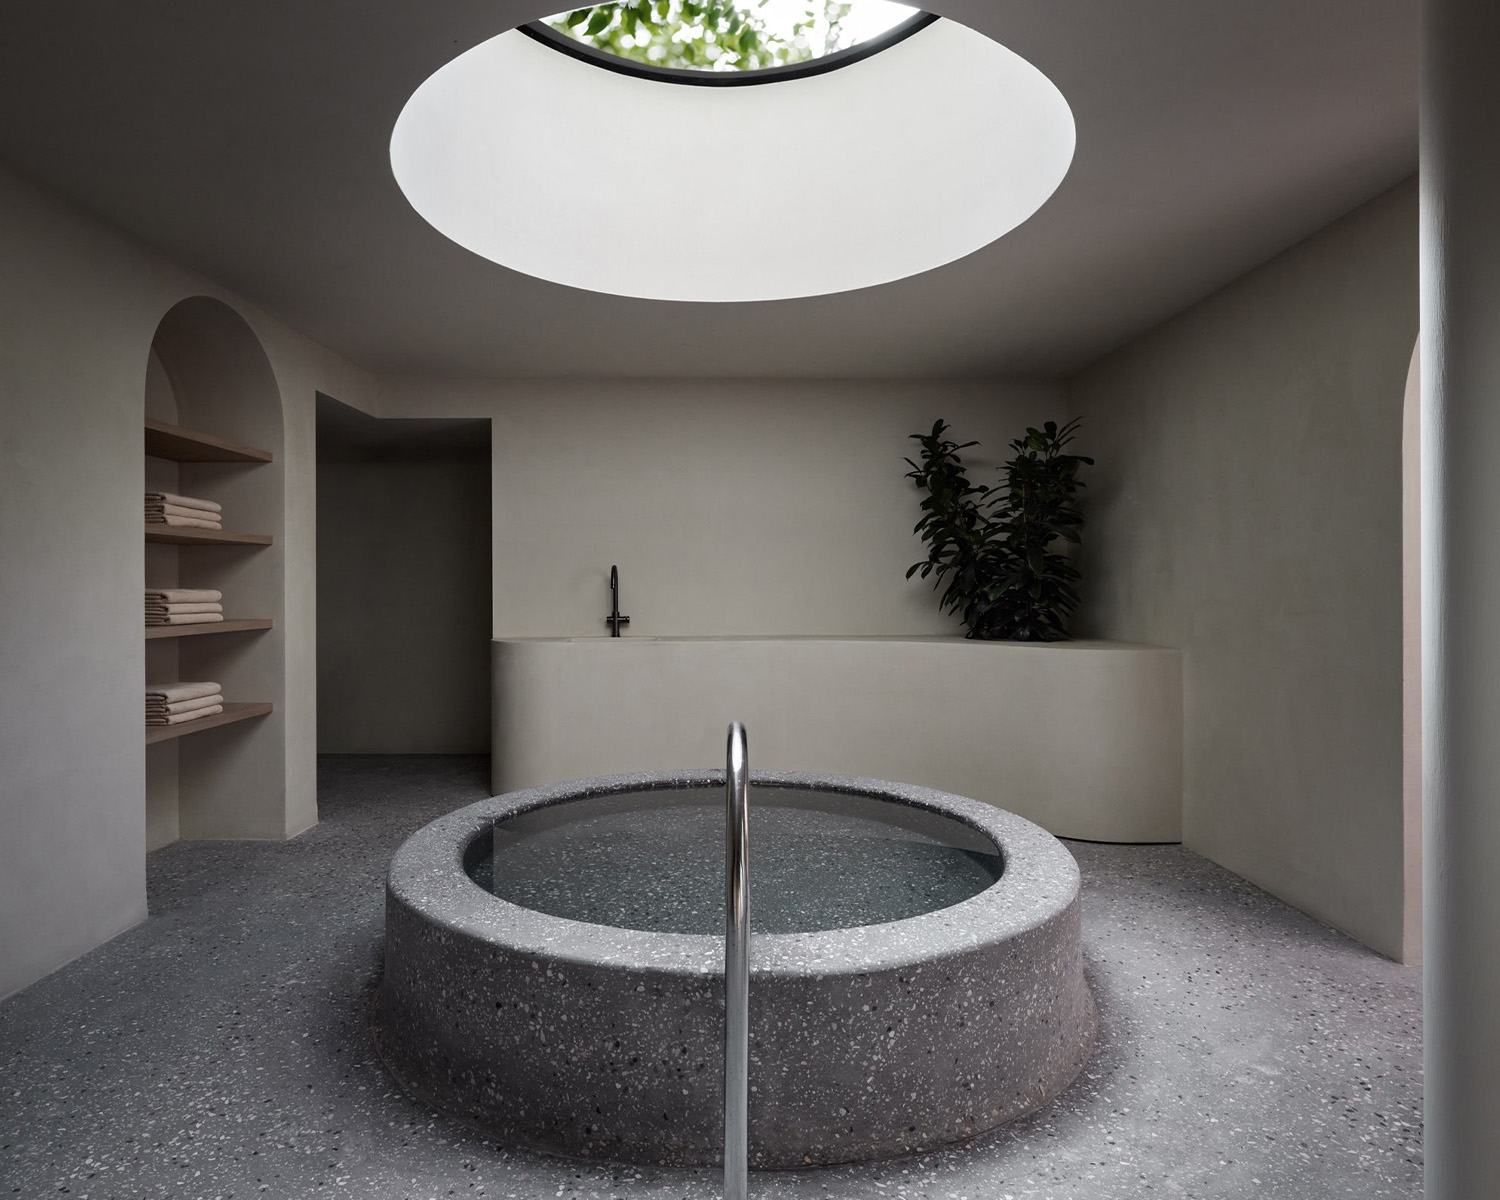 Spa area with a centrally located ice pool on a terrazzo floor. Above the pool light floods in through a big, round skylight.